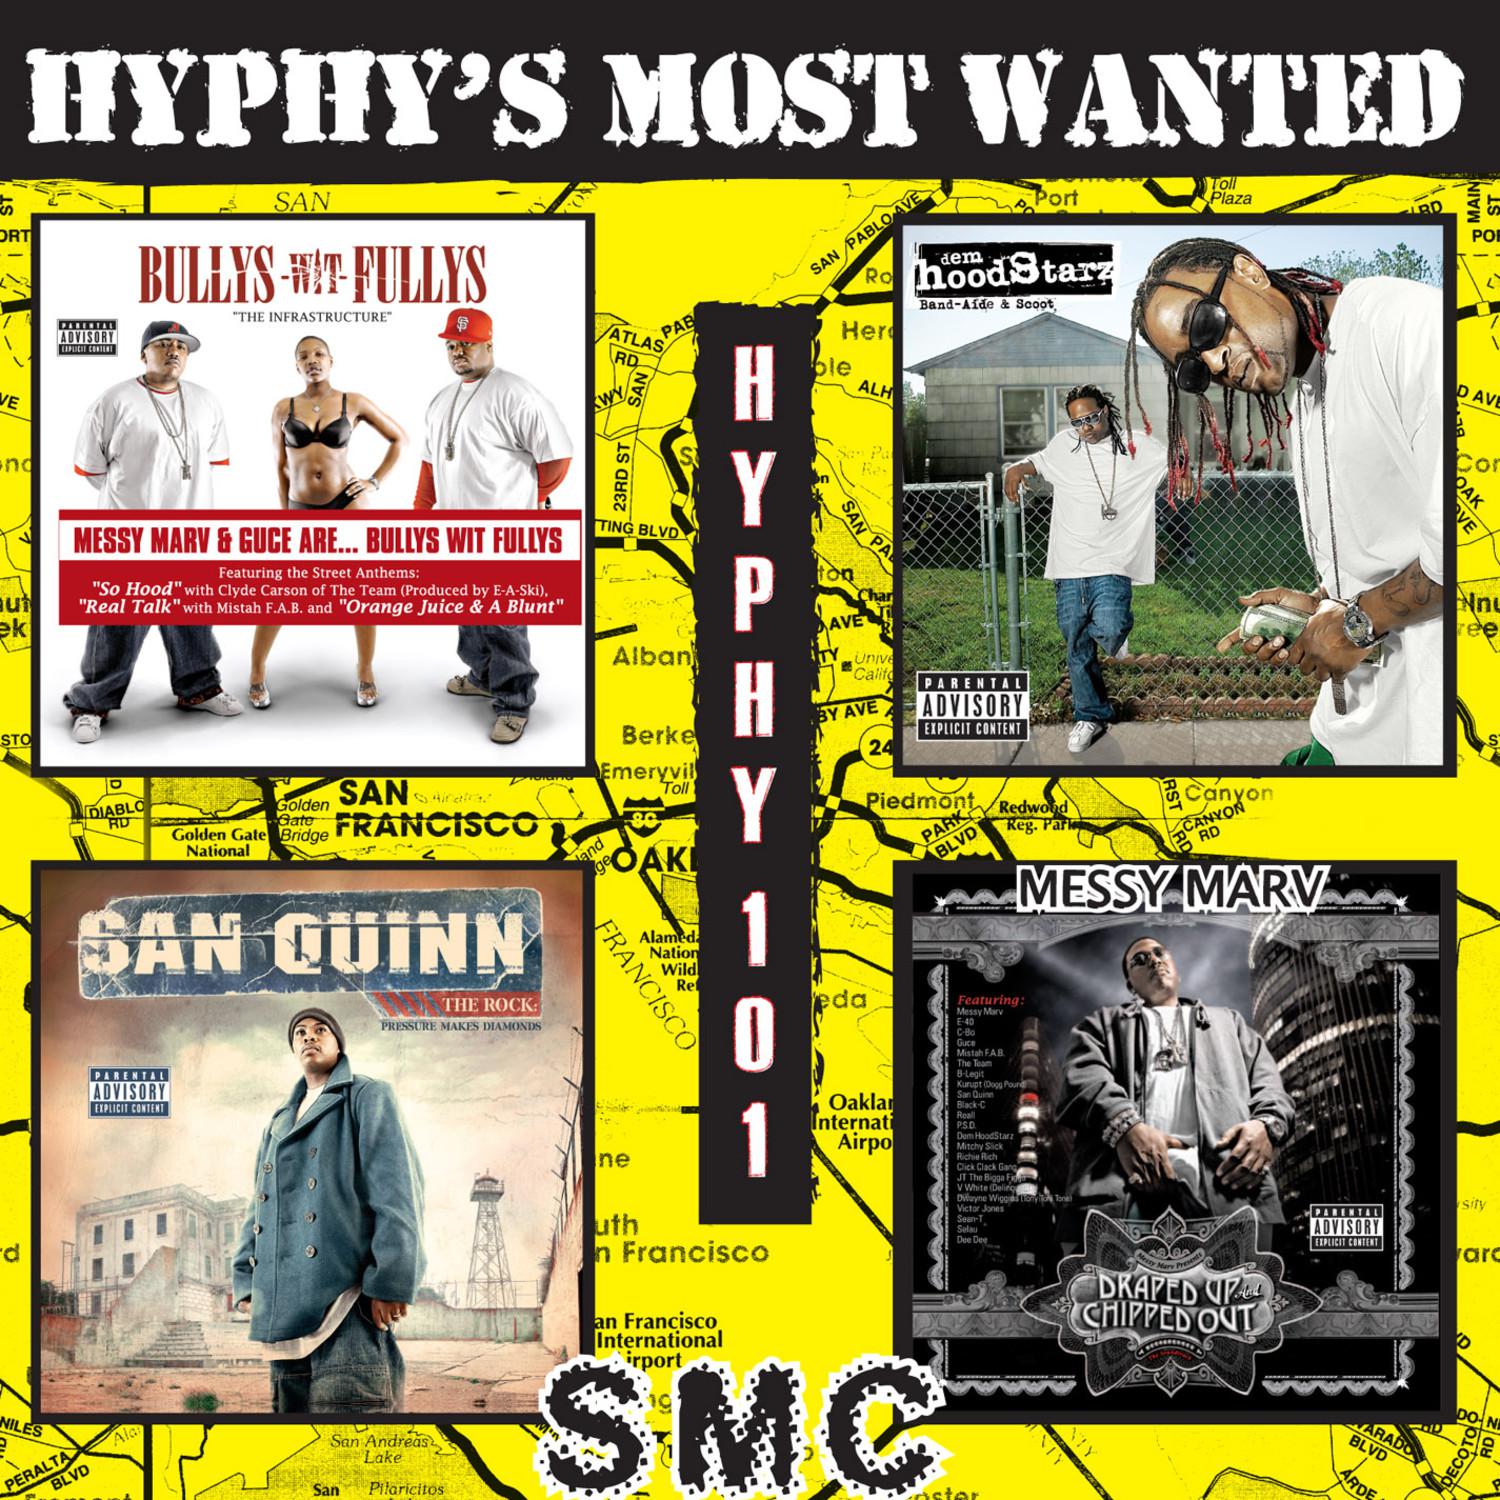 Hyphy 101 "Hyphy's Most Wanted"